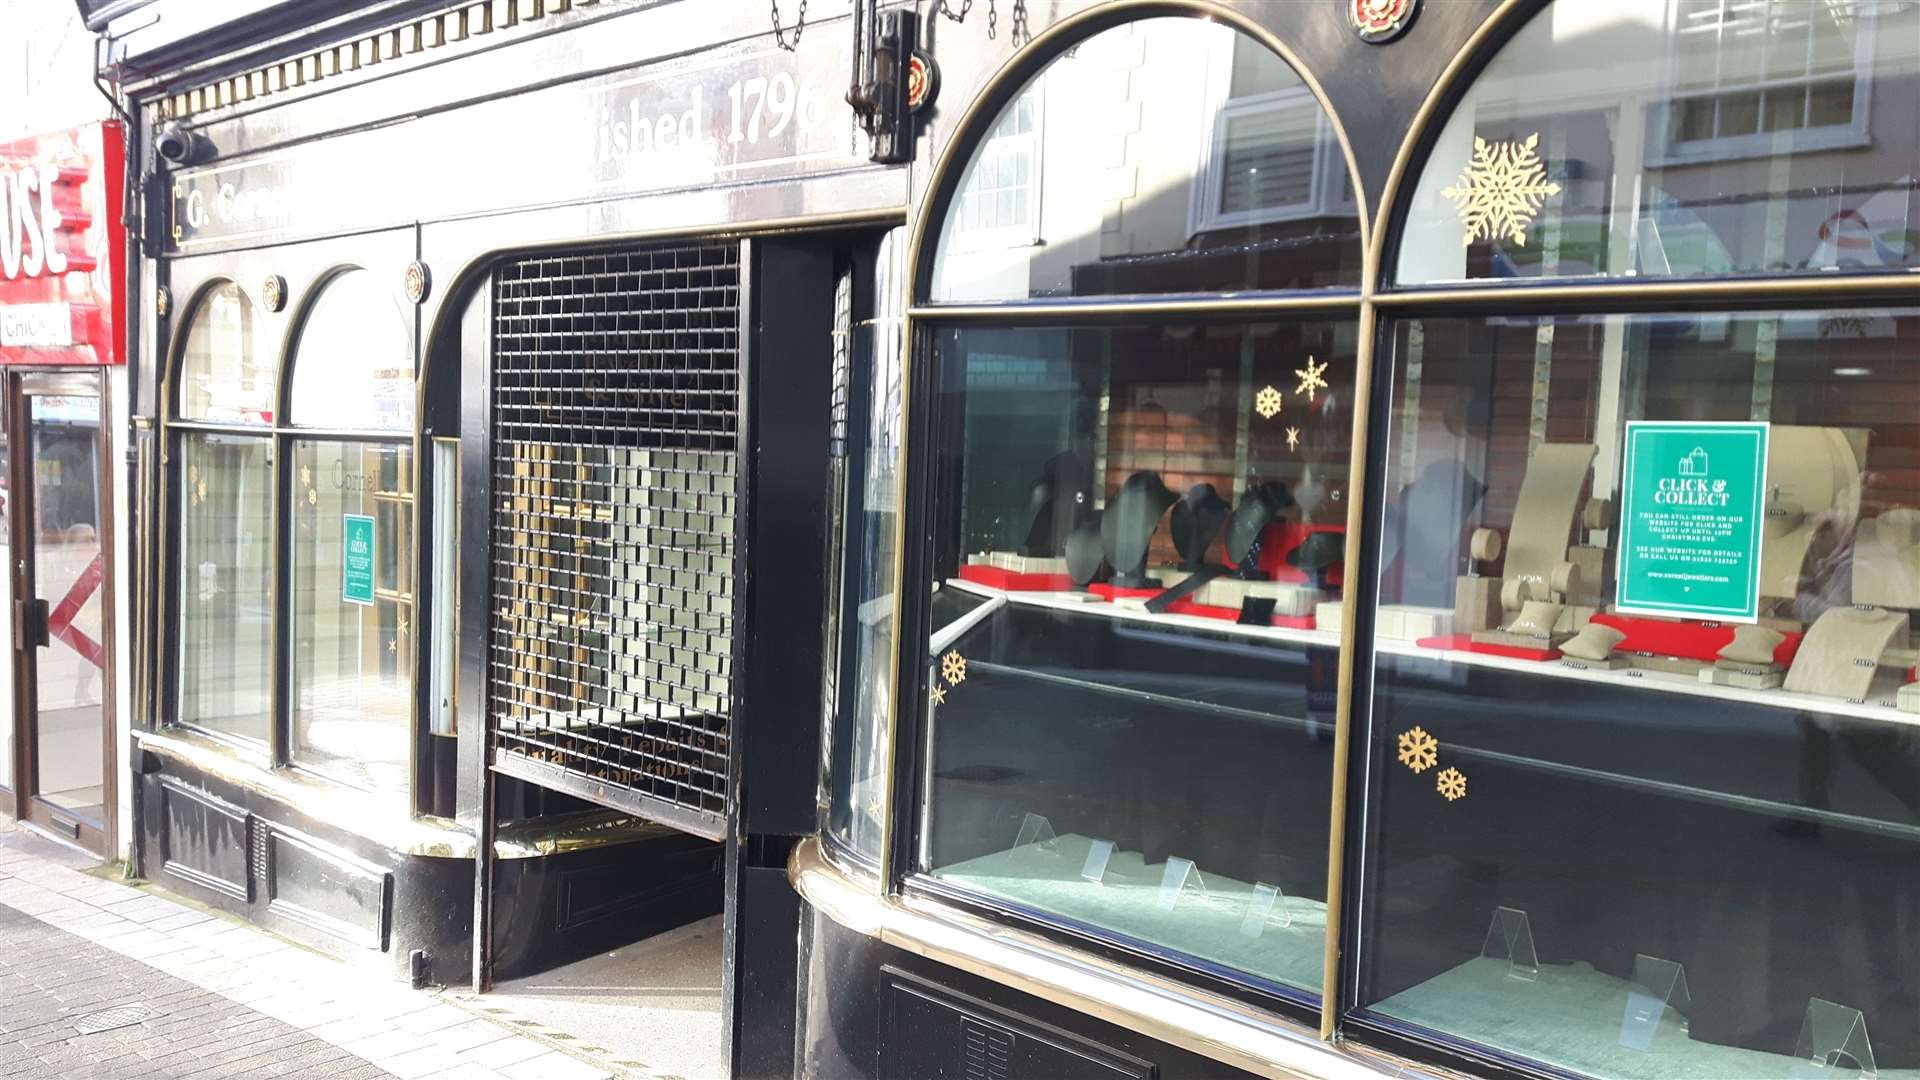 Cornell's Jewellers in Gabriel's Hill had its shutters down this morning